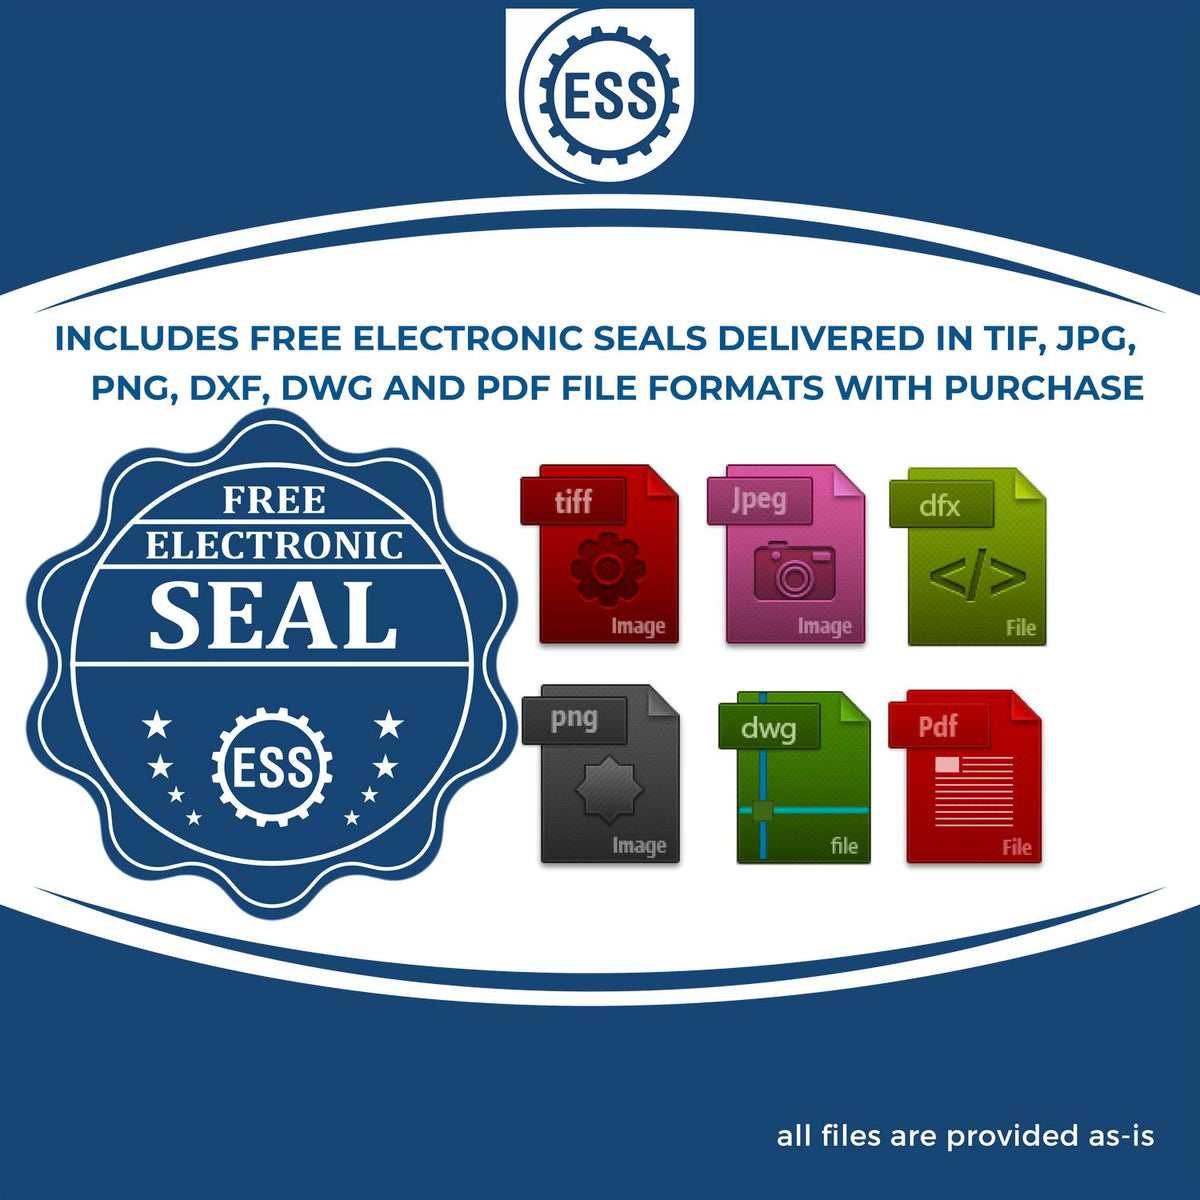 An infographic for the free electronic seal for the Hybrid New Hampshire Land Surveyor Seal illustrating the different file type icons such as DXF, DWG, TIF, JPG and PNG.